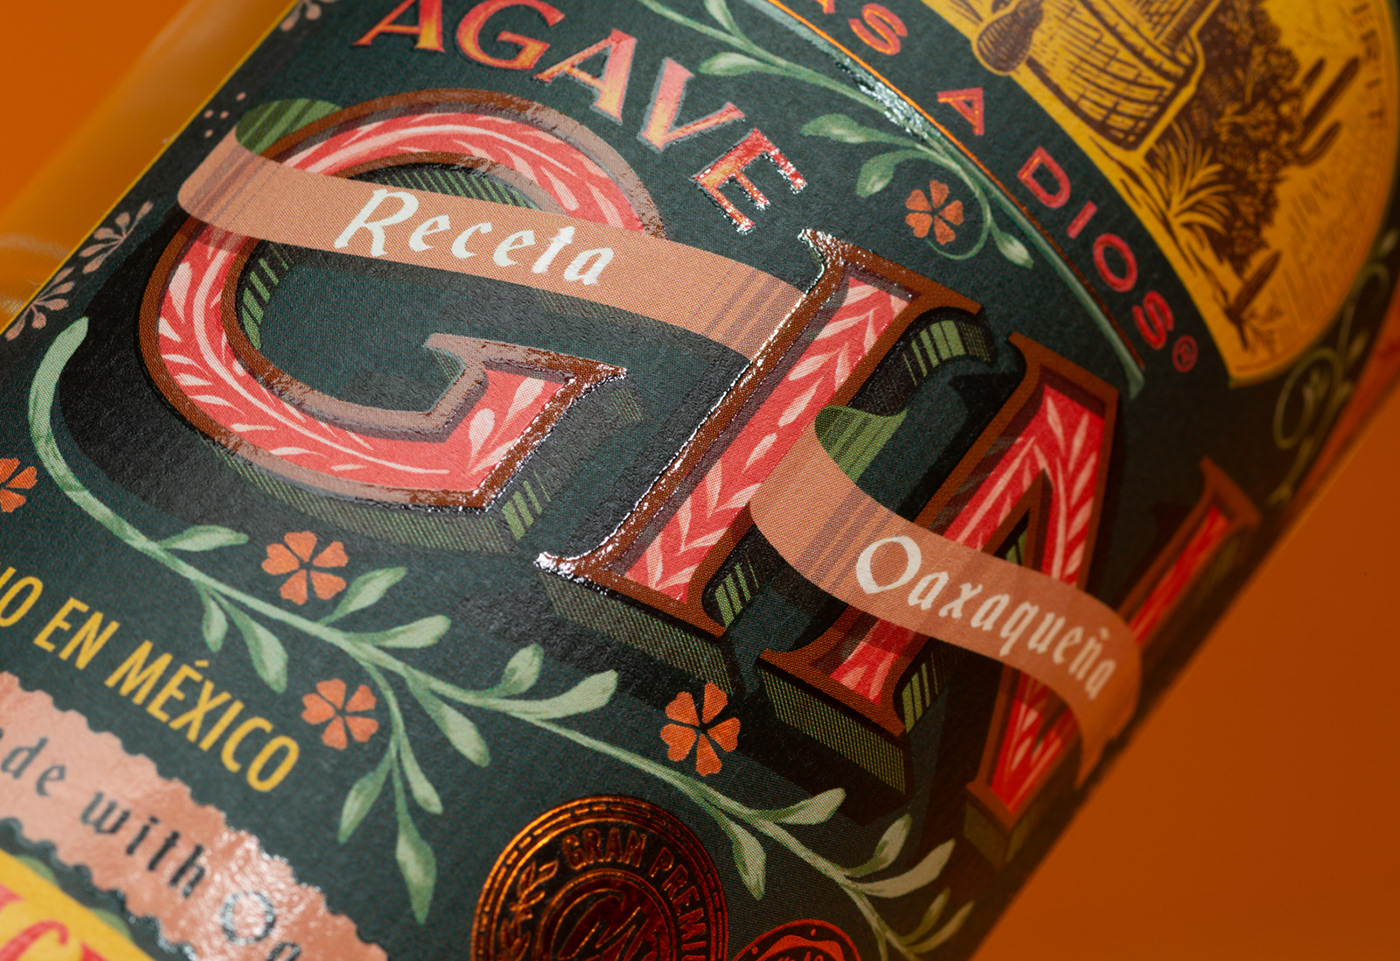 packaging design label design Illustrative Packaging graphic design mexico wine and spirits MEXICAN SPIRIT Brand Design Packaging Handmade Illustration